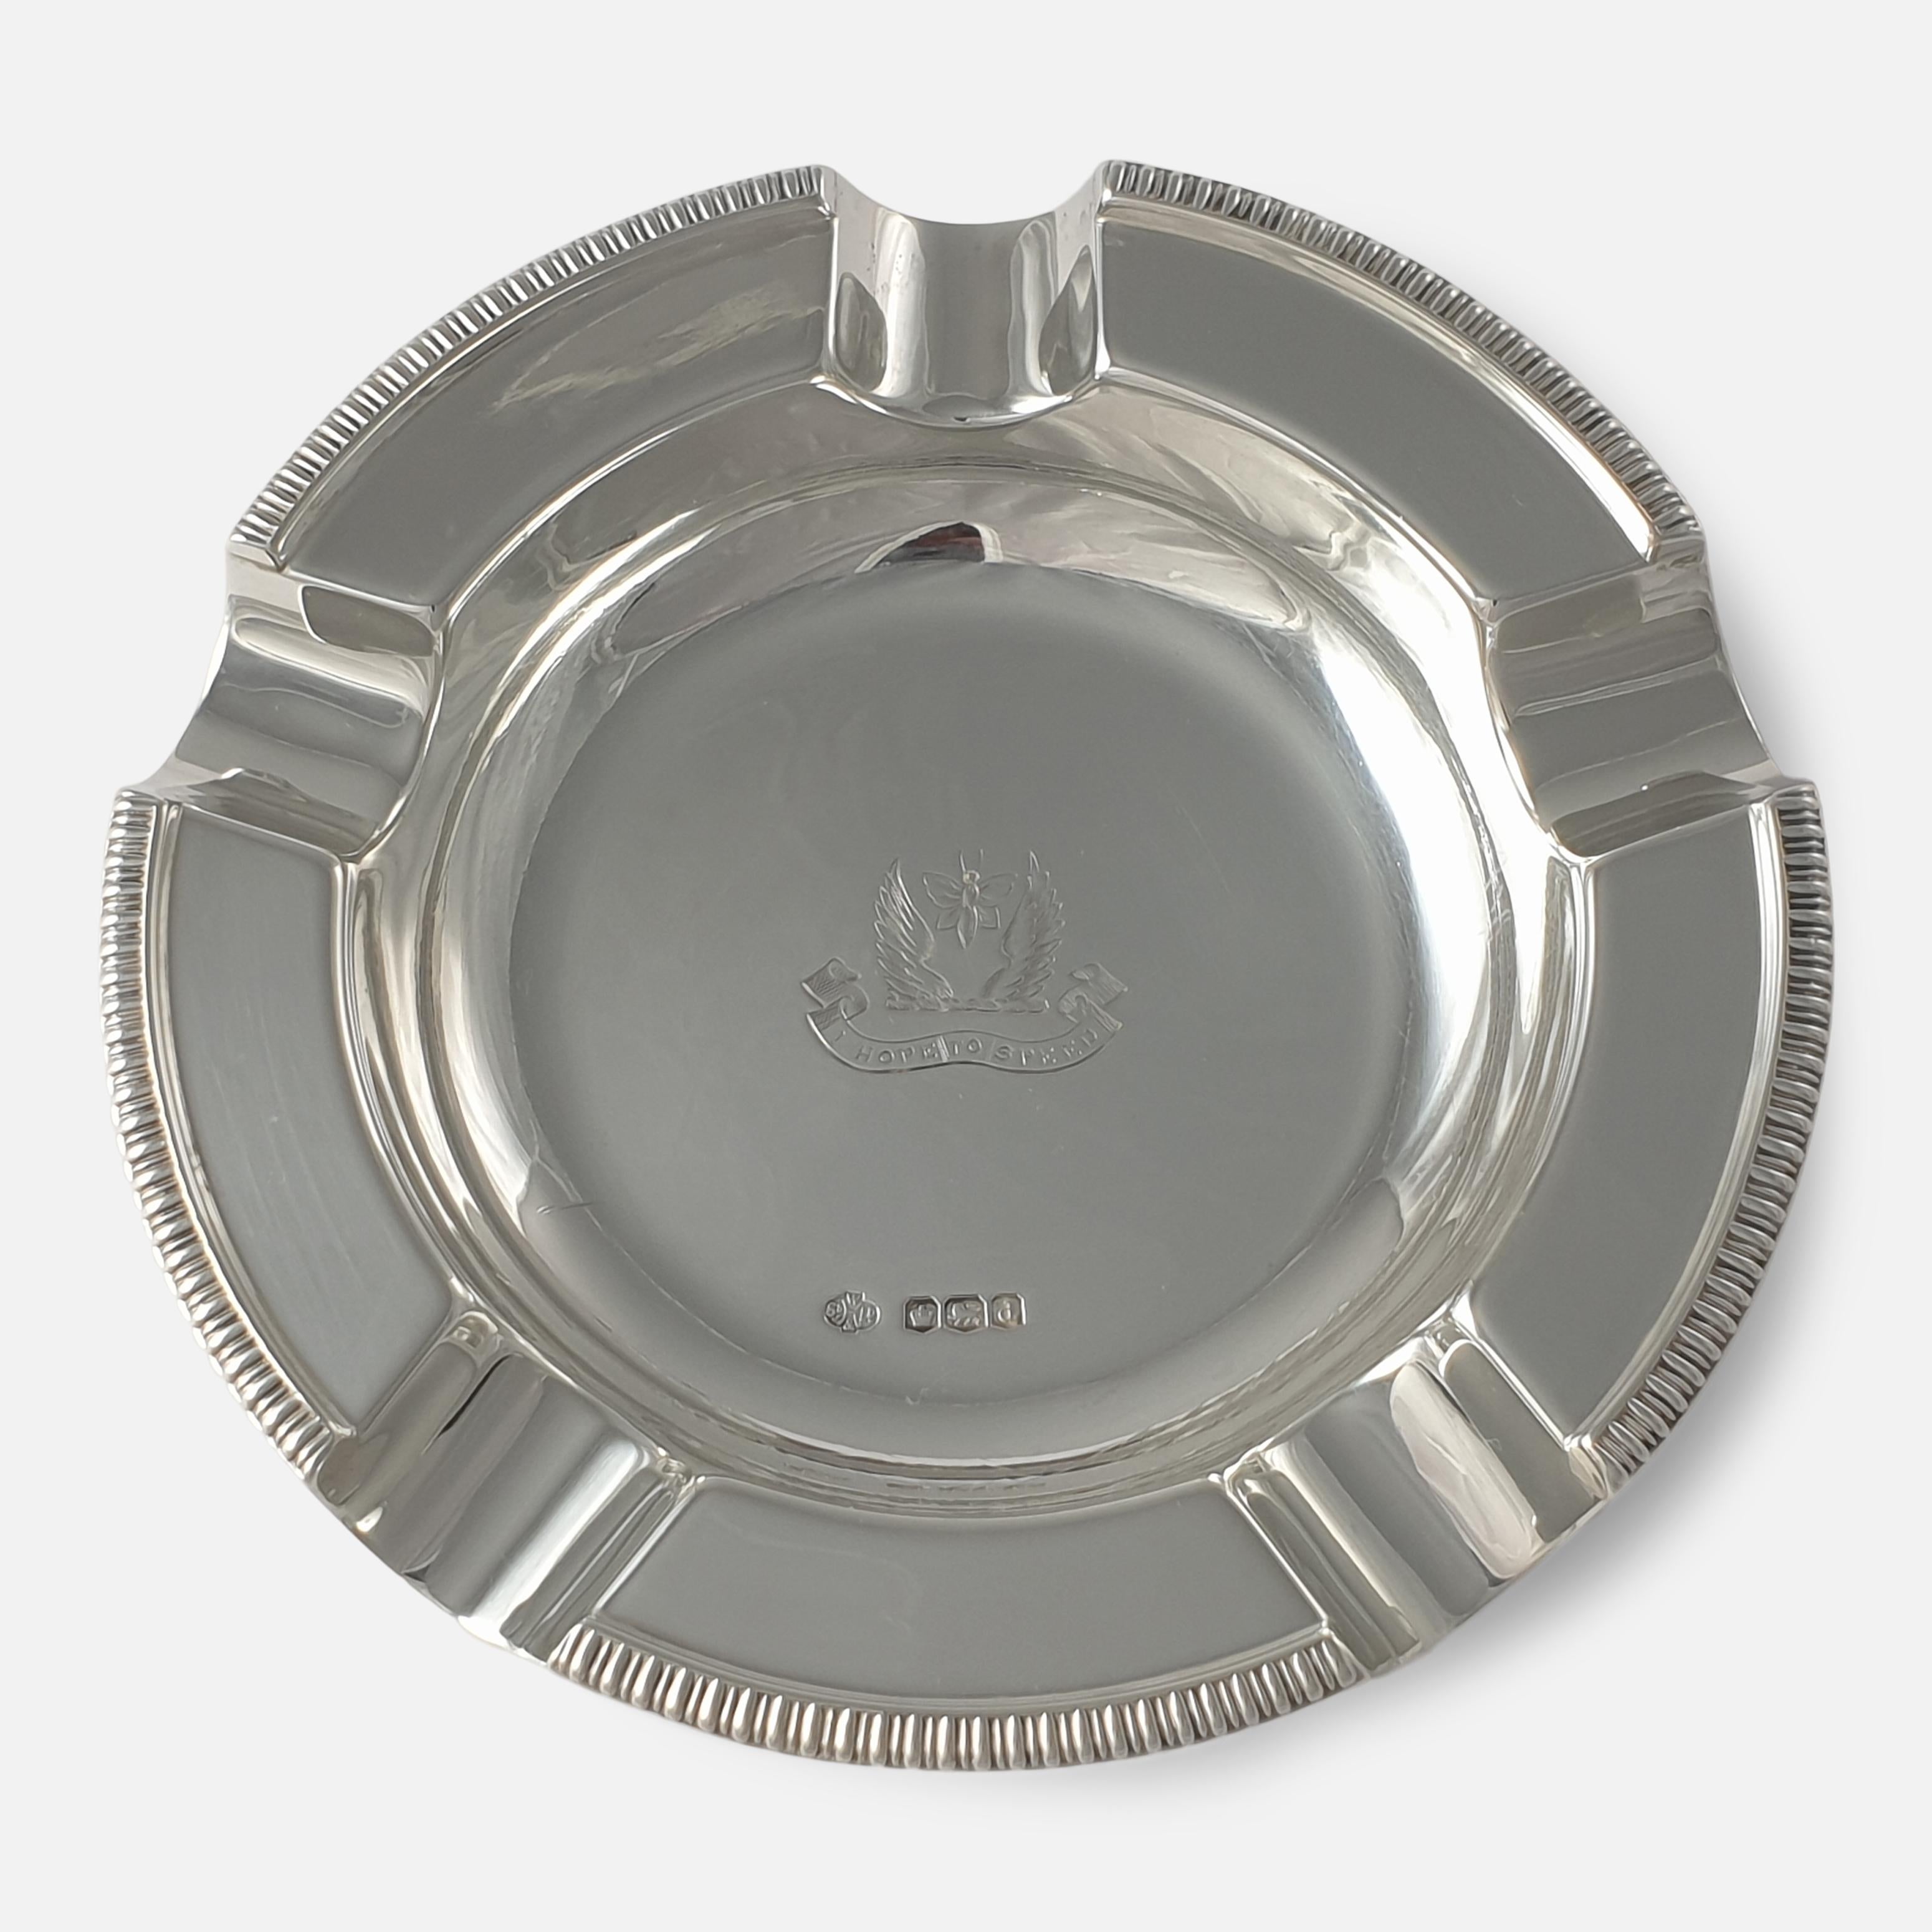 A pair of George V sterling silver crested ashtrays. The ashtrays are of circular form, with gadrooned rim, and engraved with the Butterwick crest. The ashtrays are made by William Hutton & Sons Ltd, stamped with Sheffield marks, 1919 & 1921 (date